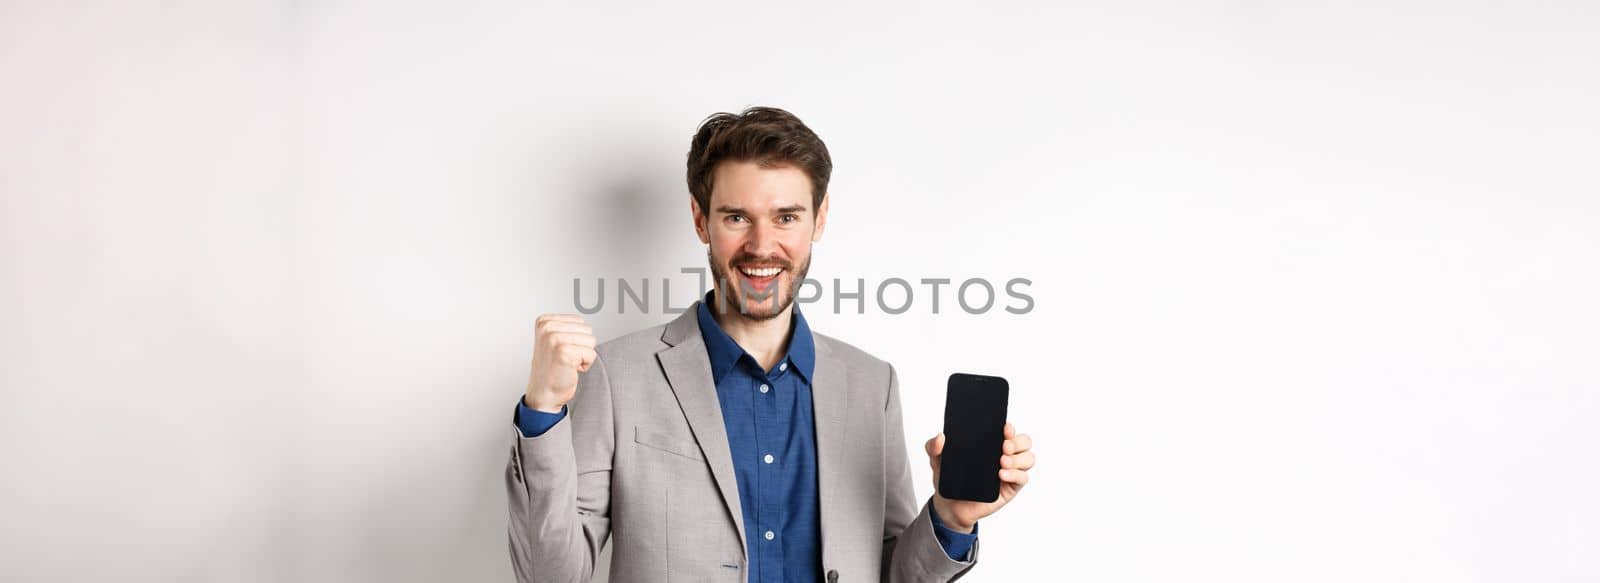 E-commerce and online shopping concept. Man making money in internet, showing smartphone screen and winner gesture, smiling satisfied, standing on white background.